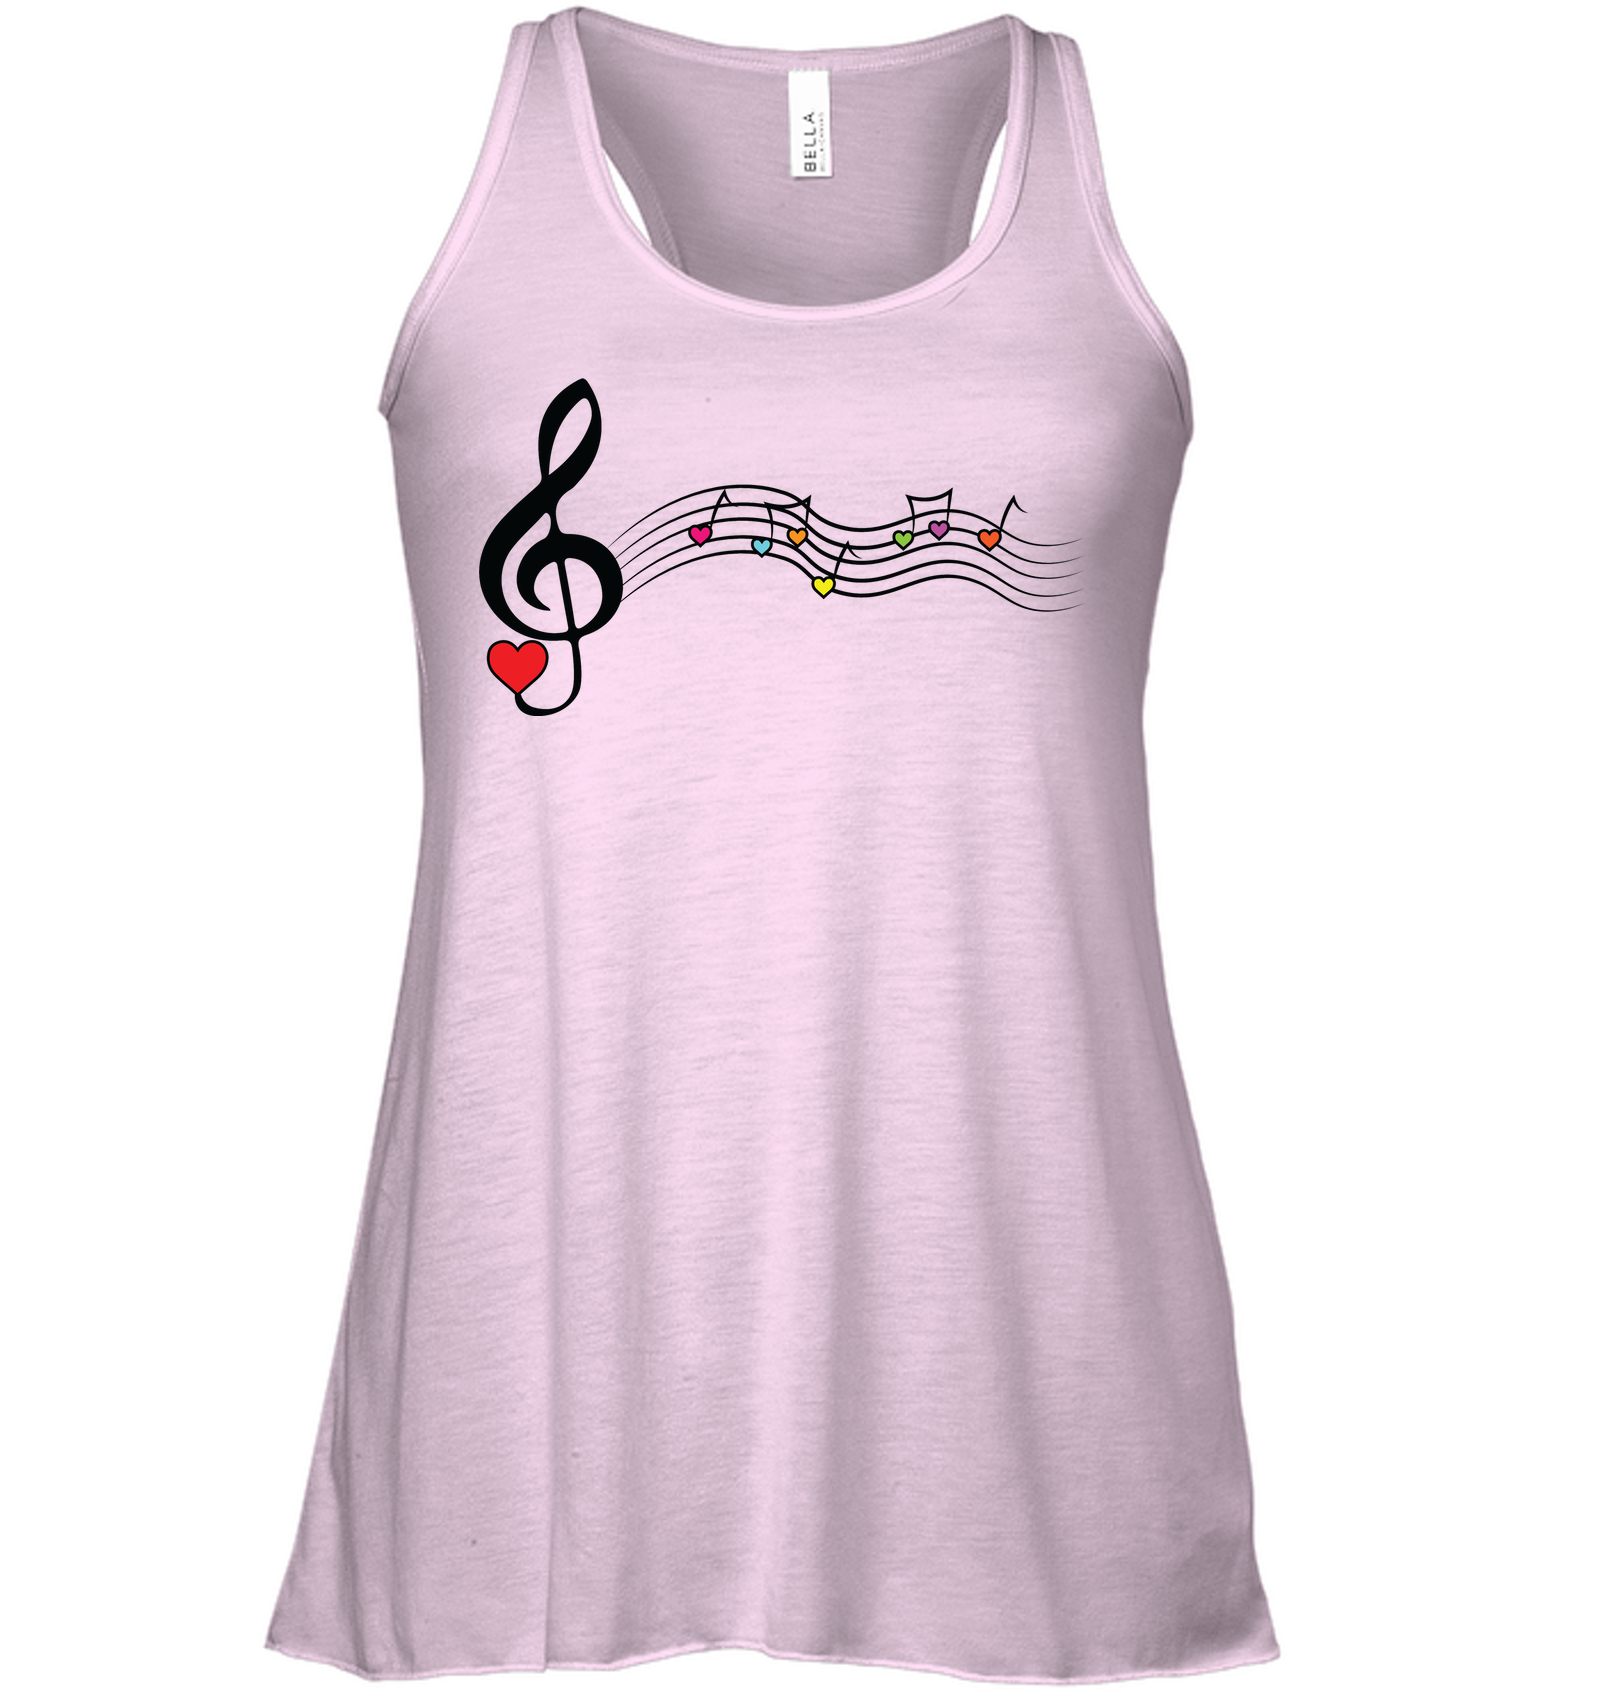 Musical Waves, Heart Notes and Colors - Bella + Canvas Women's Flowy Racerback Tank